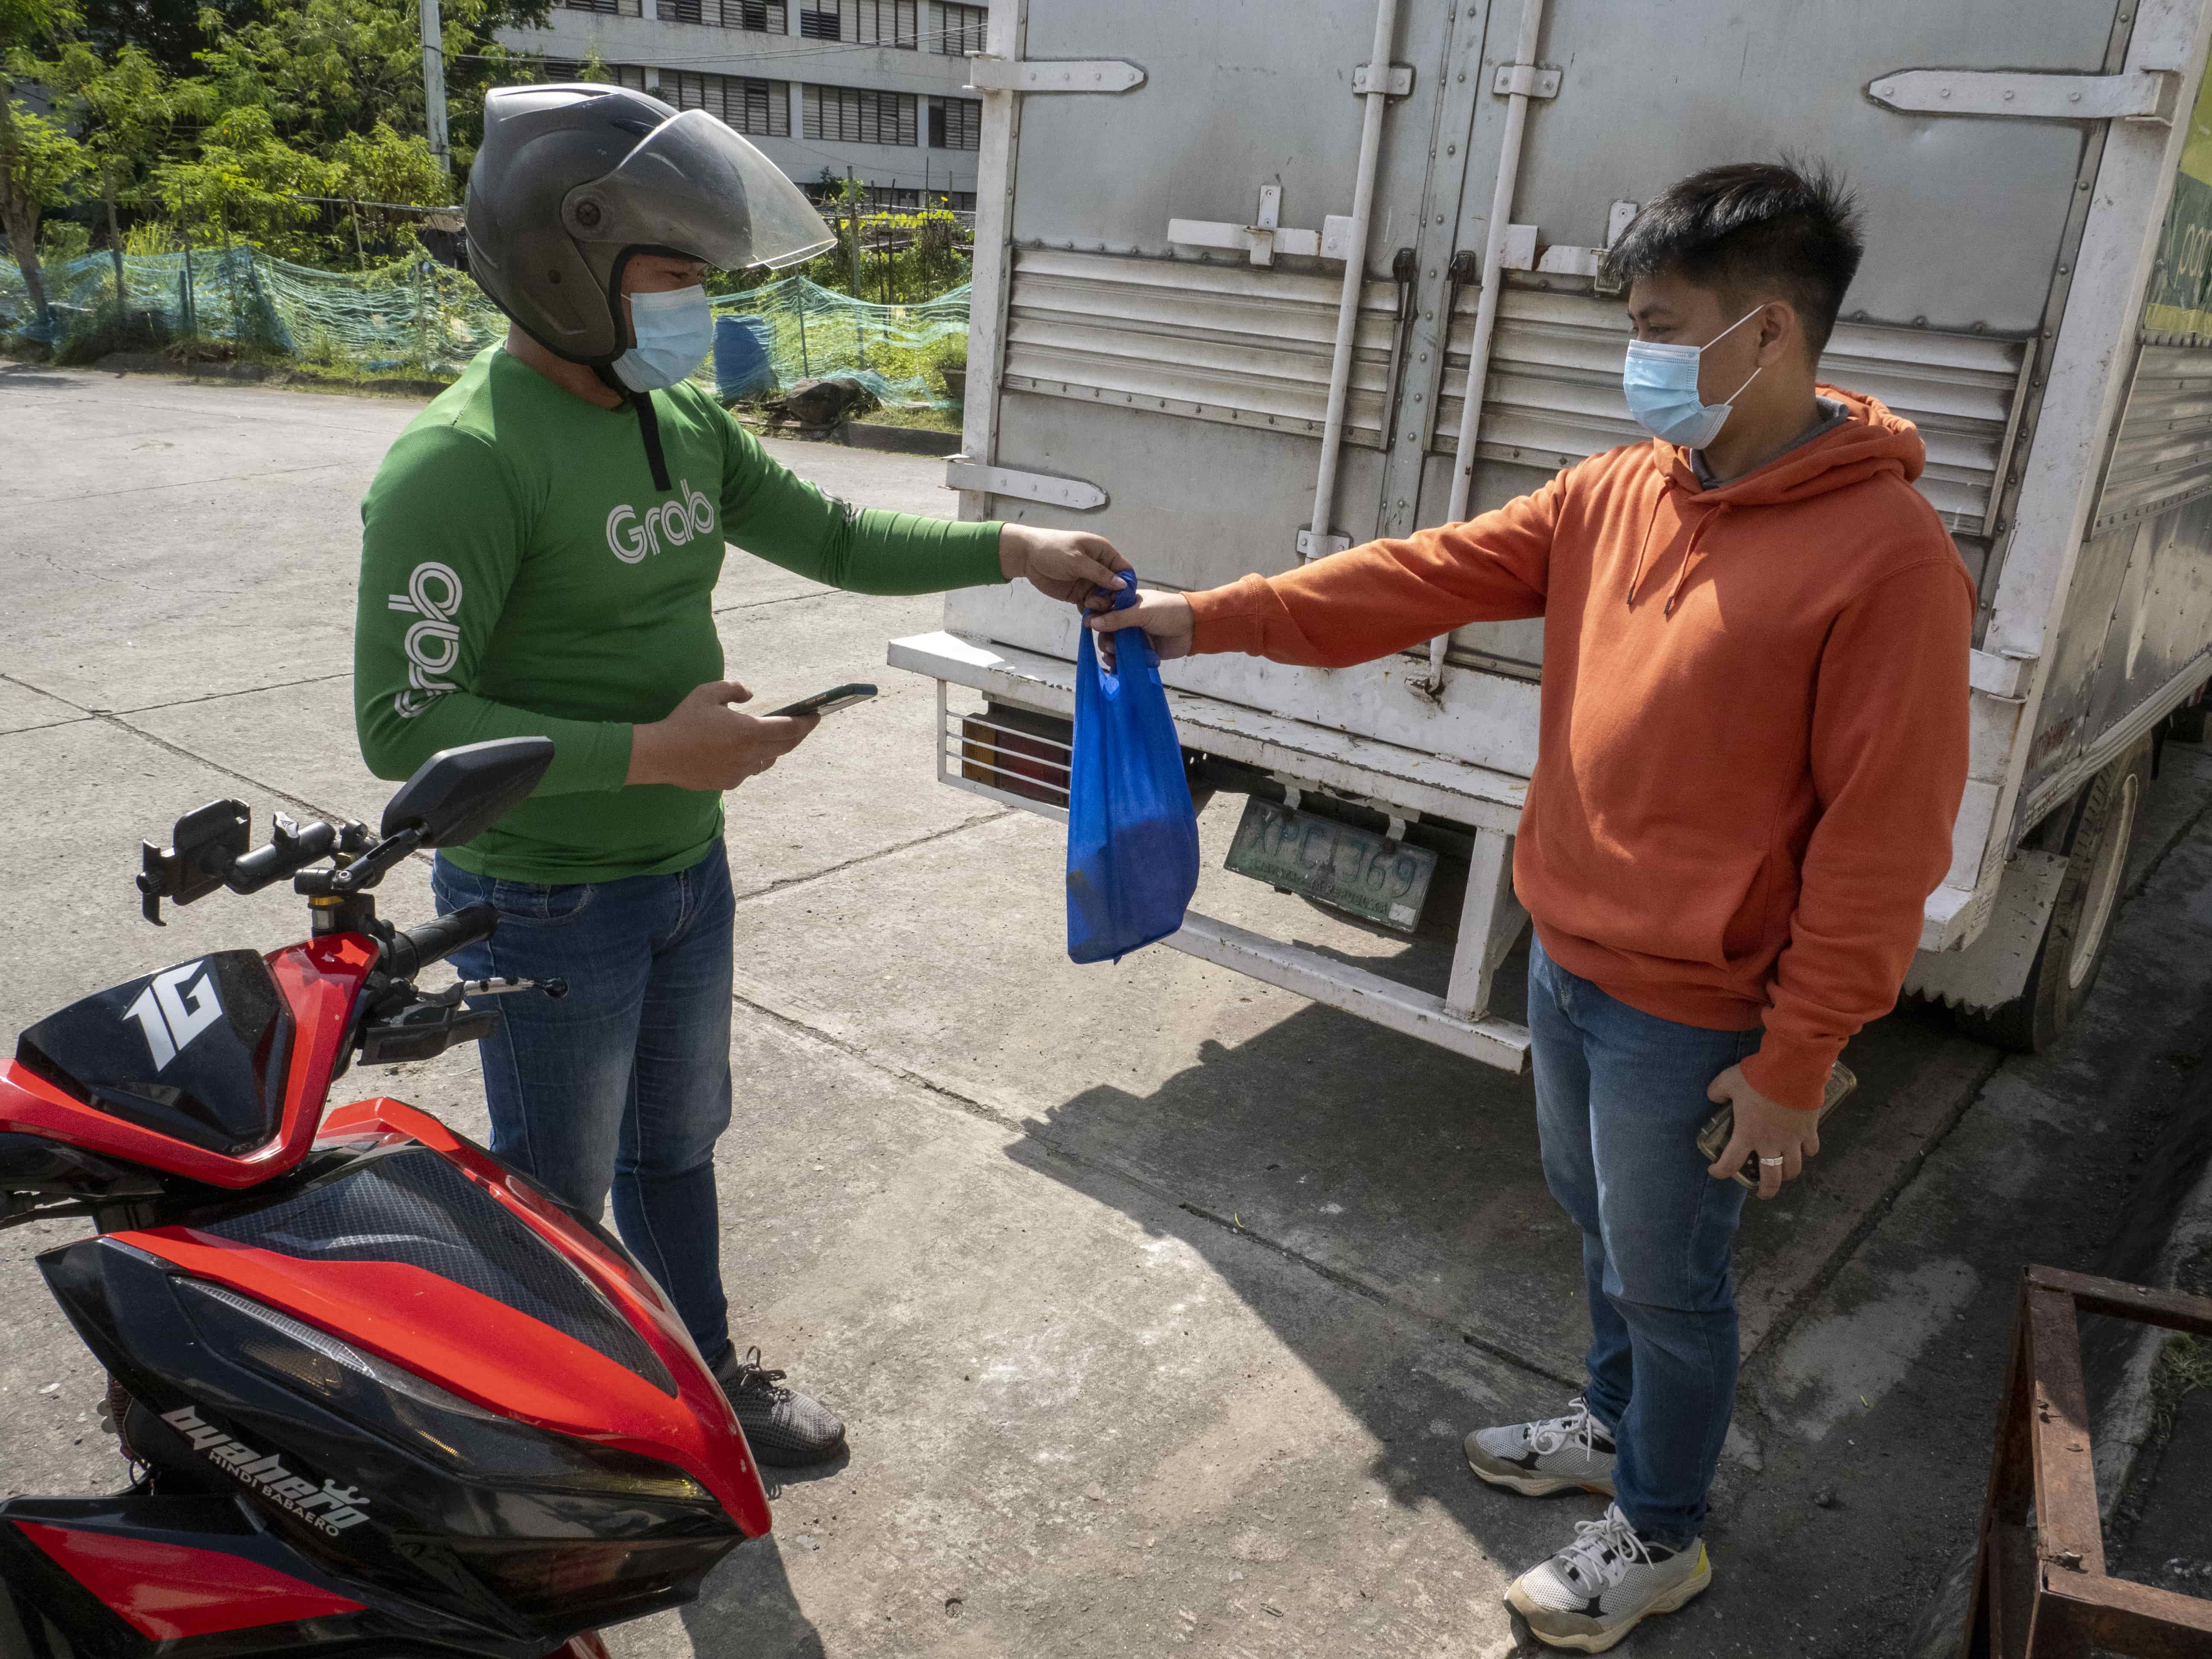 For two months, Angemar Abot juggled his studies as a Tzu Chi scholar with work as a delivery rider. 【Photo by Matt Serrano】